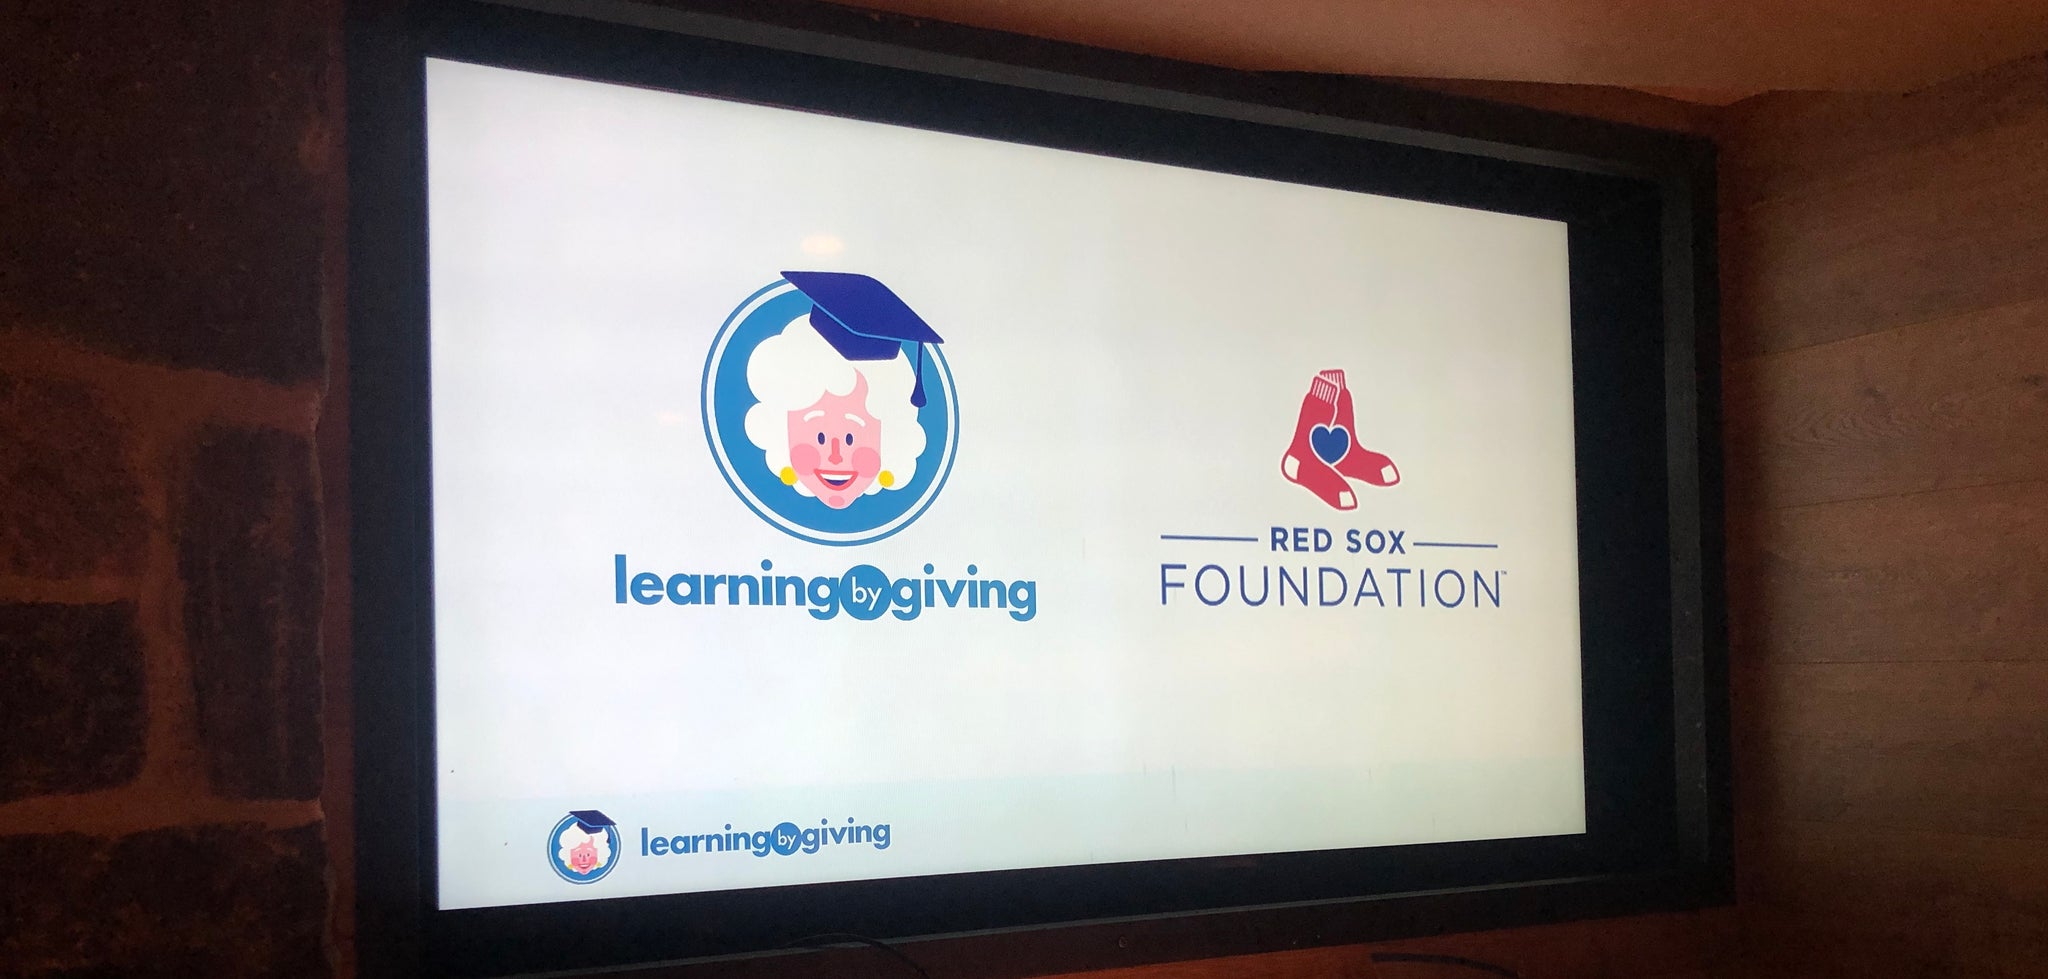 Giving Back Through Learning, Trivia, and Baseball